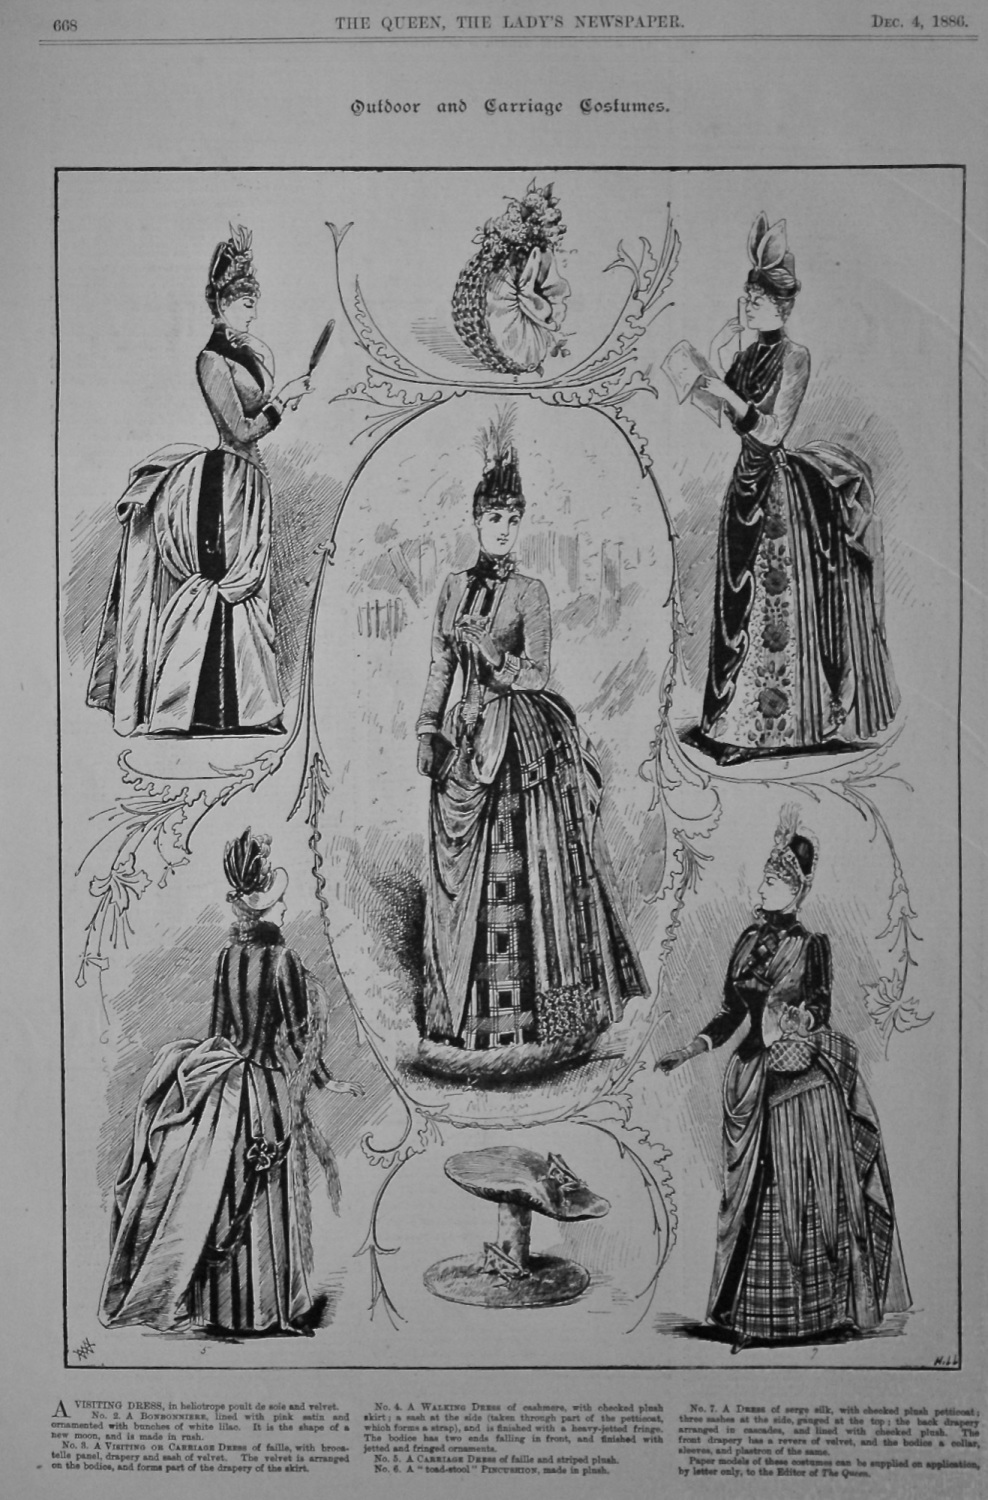 Outdoor and Carriage Costumes.  1886.